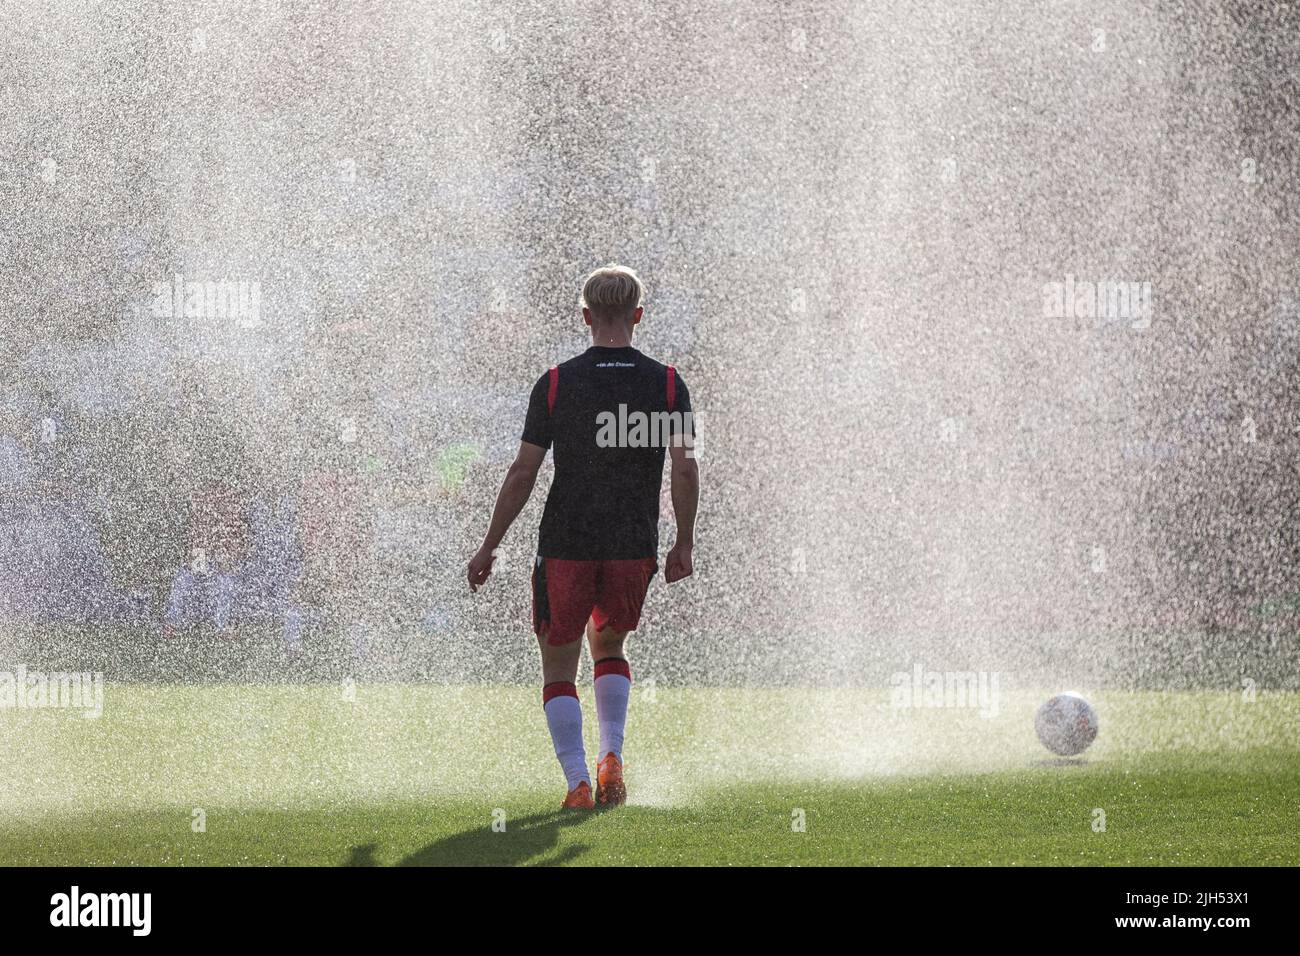 Football warming before a game at lower league match whilst sprinklers spray water. Stock Photo